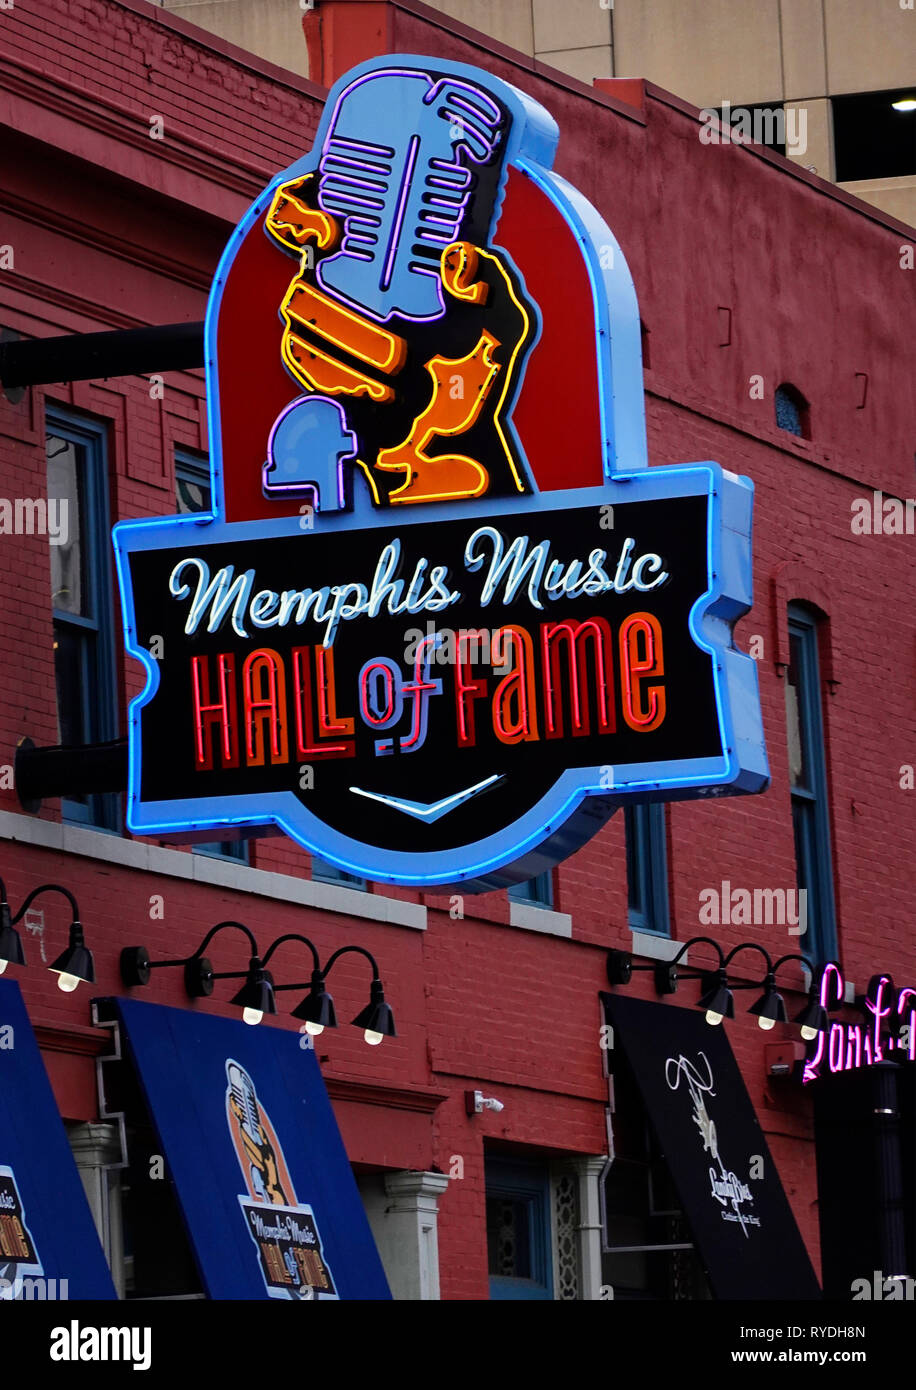 Memphis music hall of fame Tennessee Stock Photo